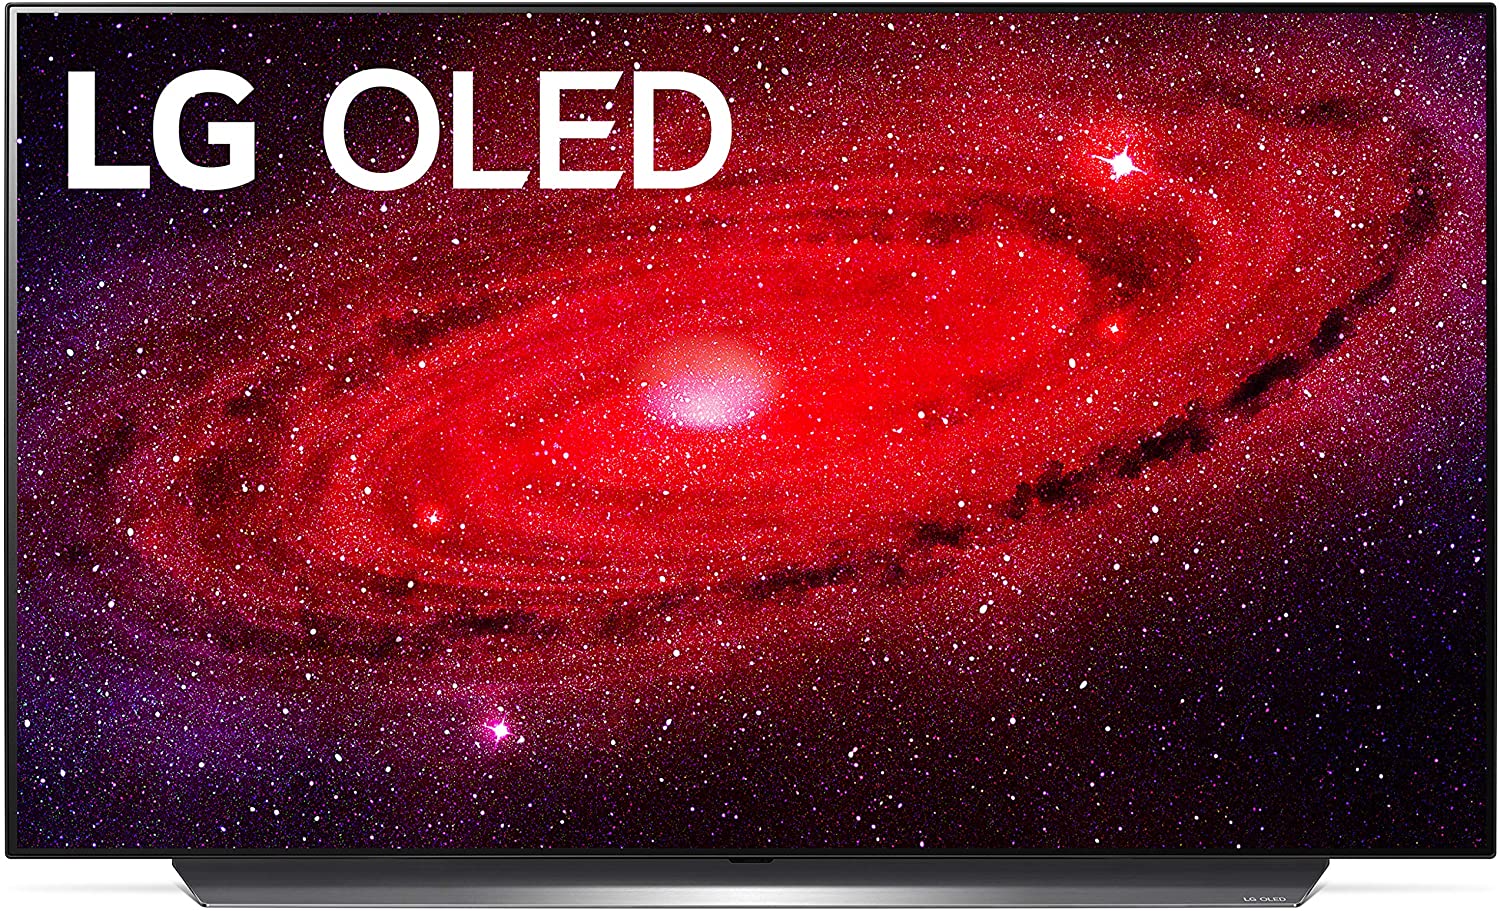 LG OLED TV for gaming